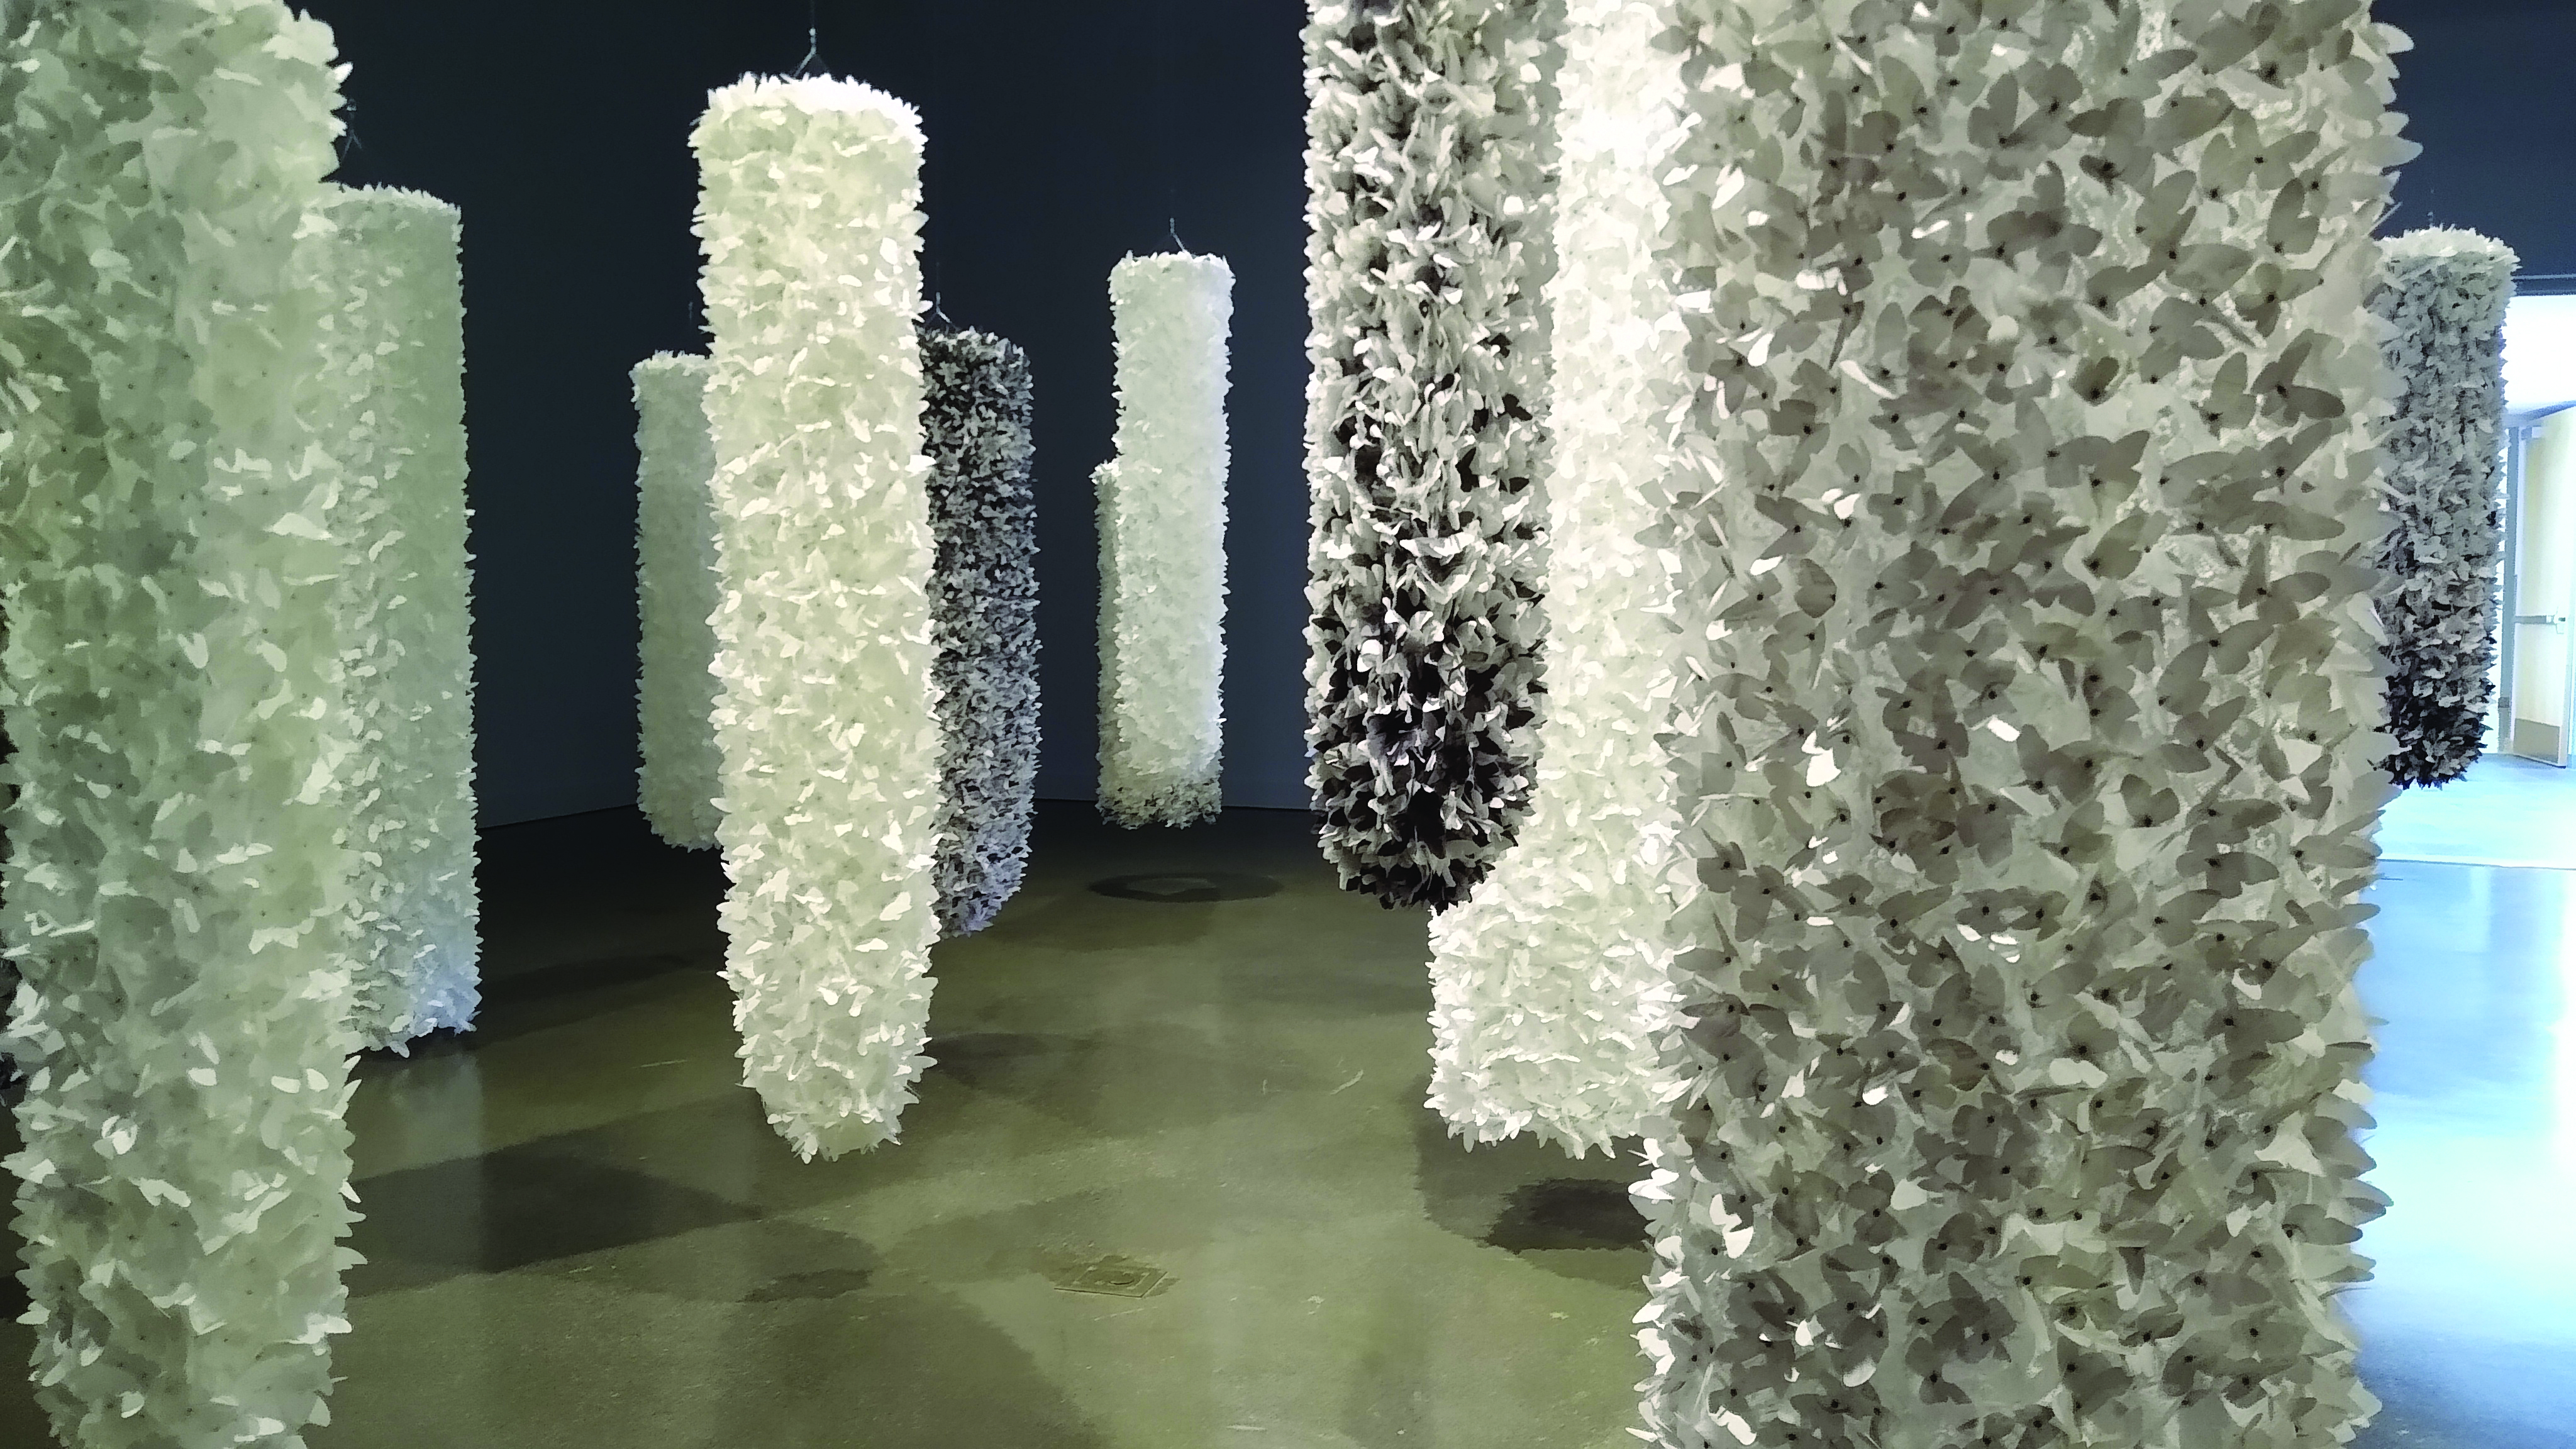 "Refugium" by Christine Laurel is an immersive and calming environment. It's part of the "Lift Your Spirits" exhibit at William King Museum of Art, Abingdon, Virginia.